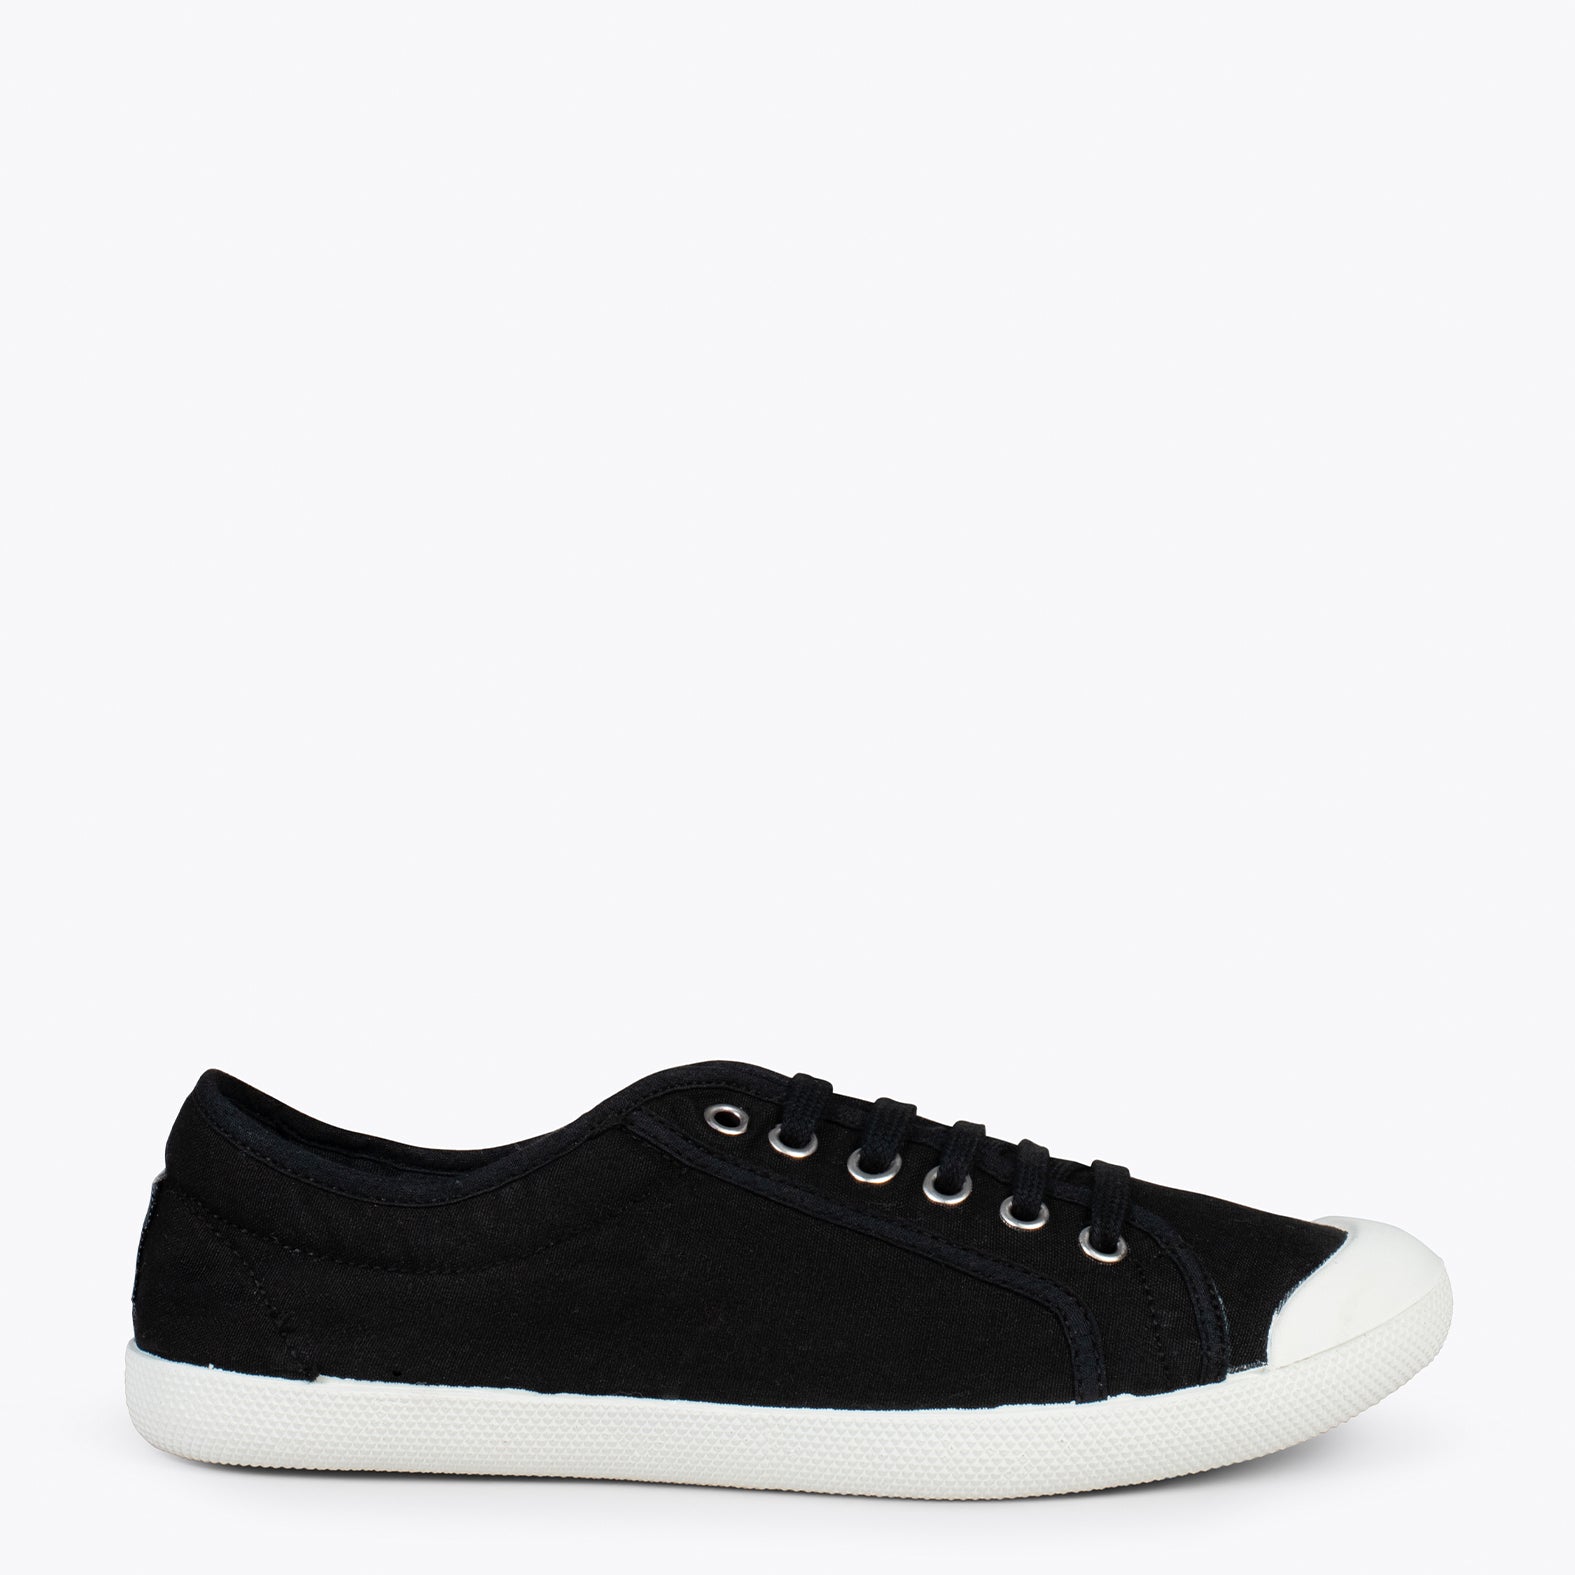 BAOBAB – BLACK BCI cotton sneakers from IO&GO